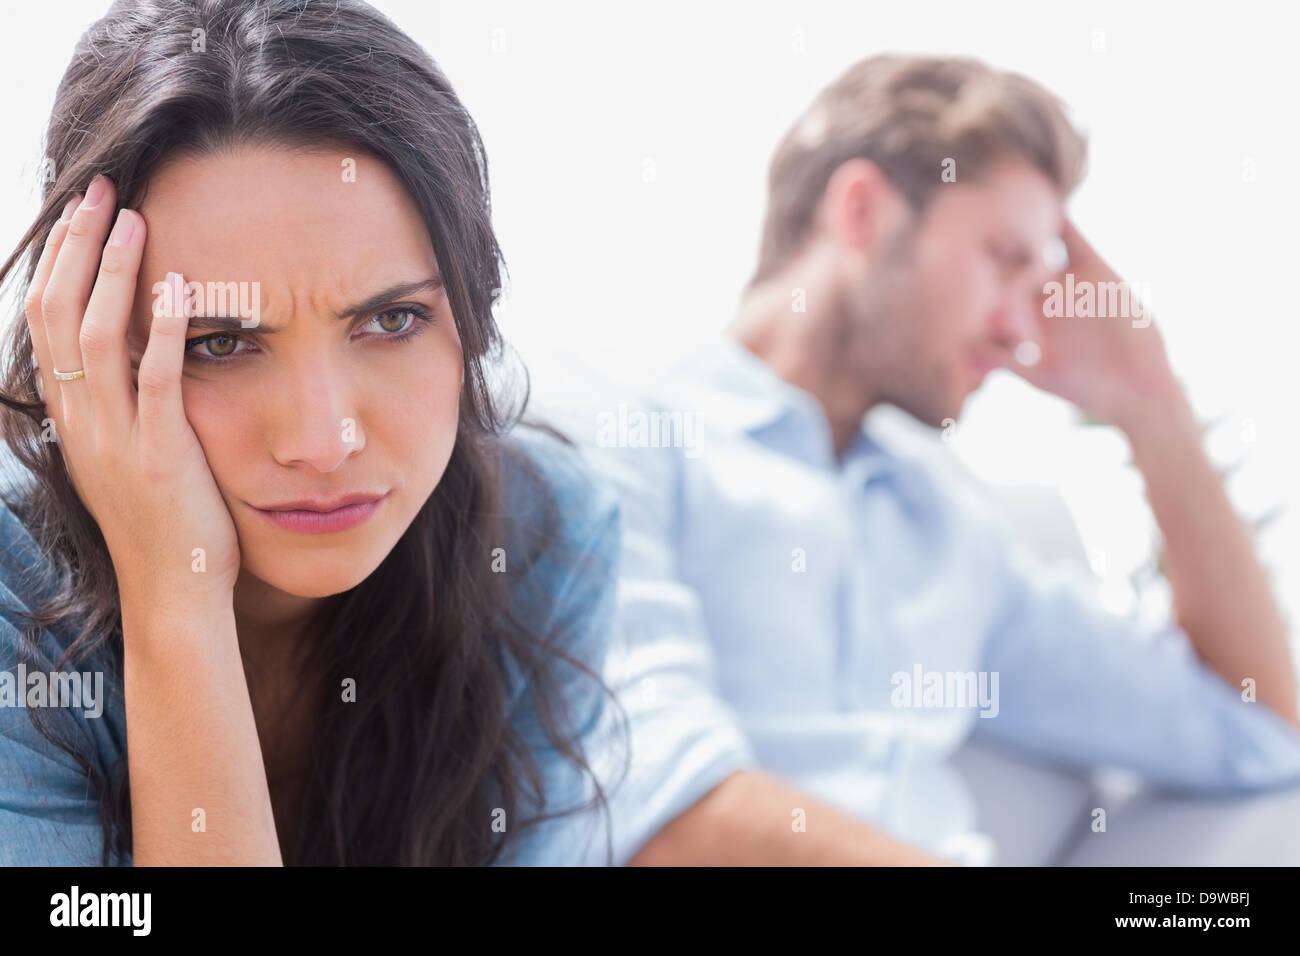 Irritated woman holding her head Stock Photo